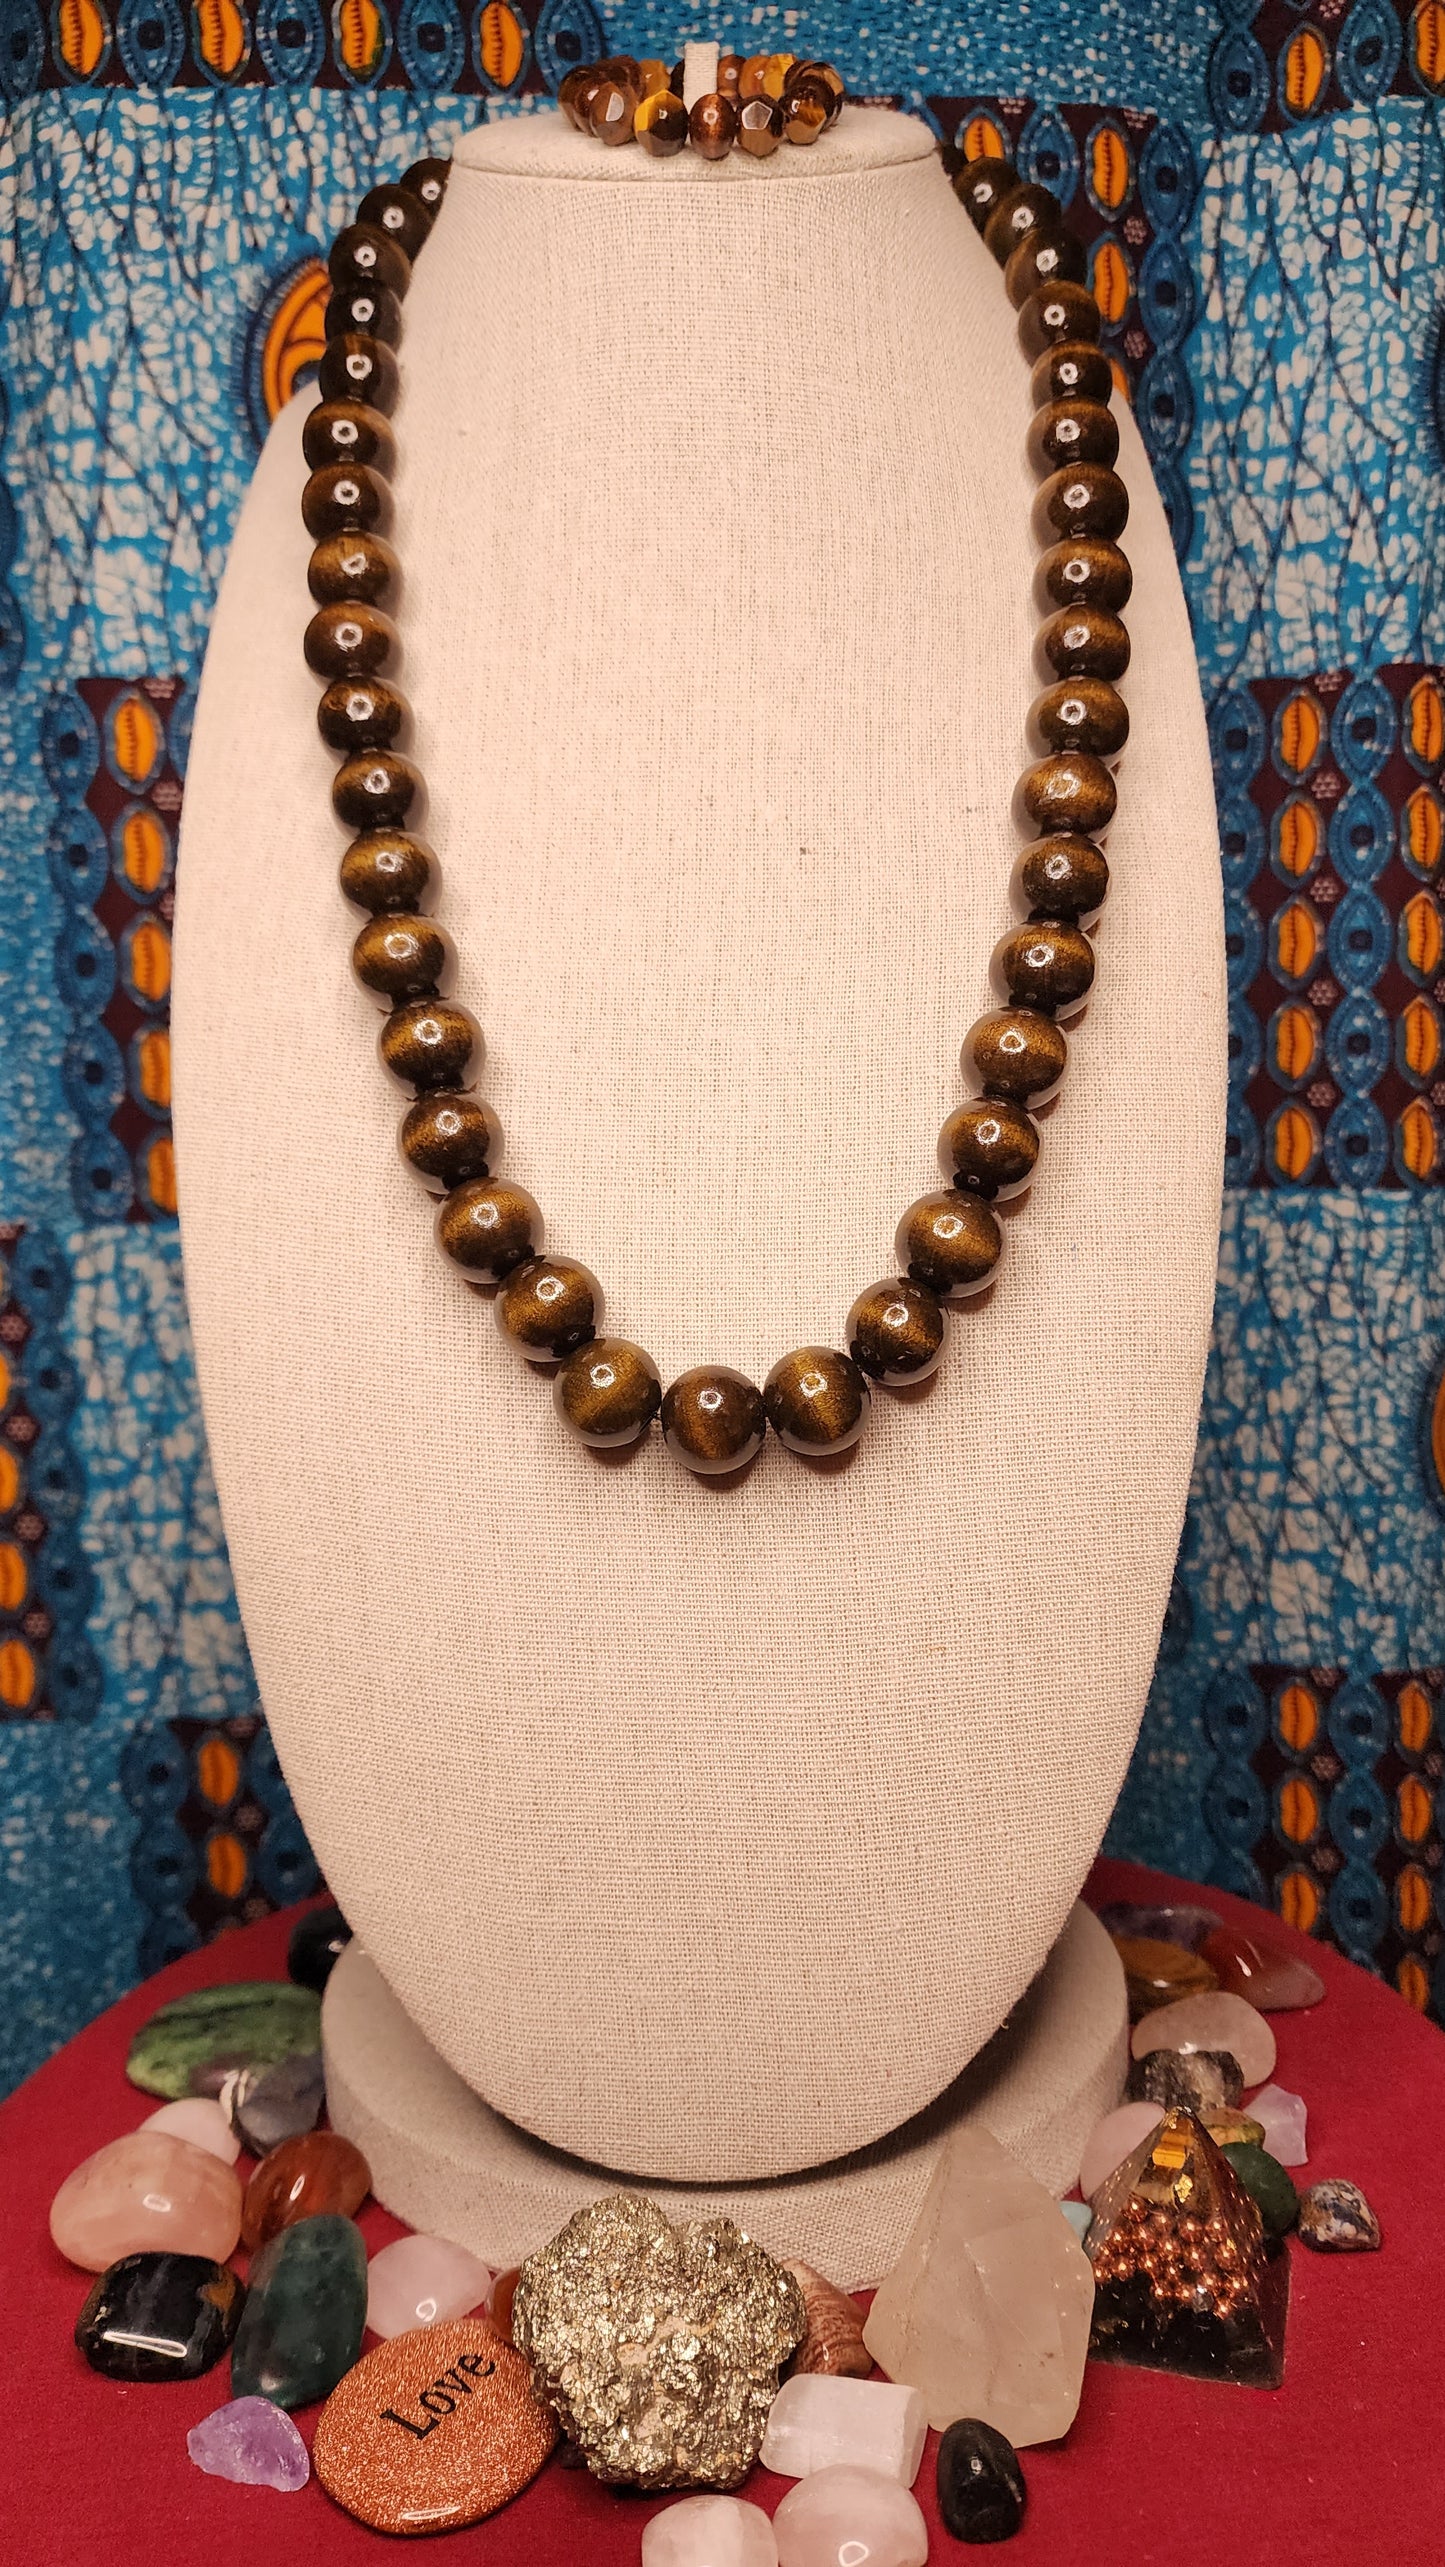 Medium/Large Wood Grain Beaded Necklace and Tiger's Eye With Wood Grain Beads Bracelet Set